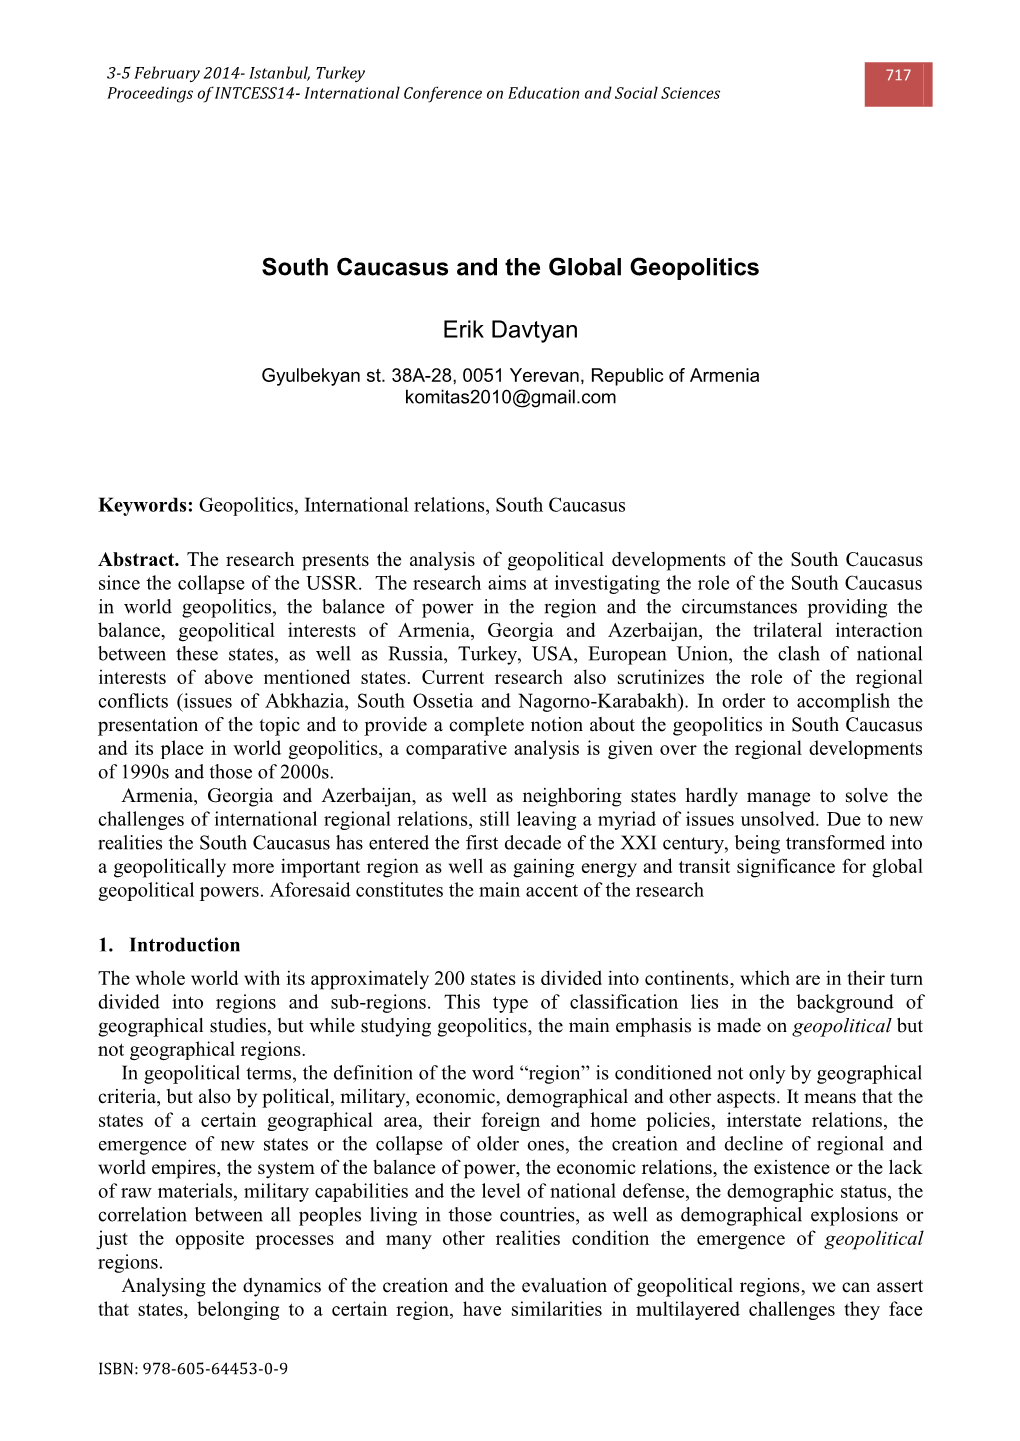 South Caucasus and the Global Geopolitics